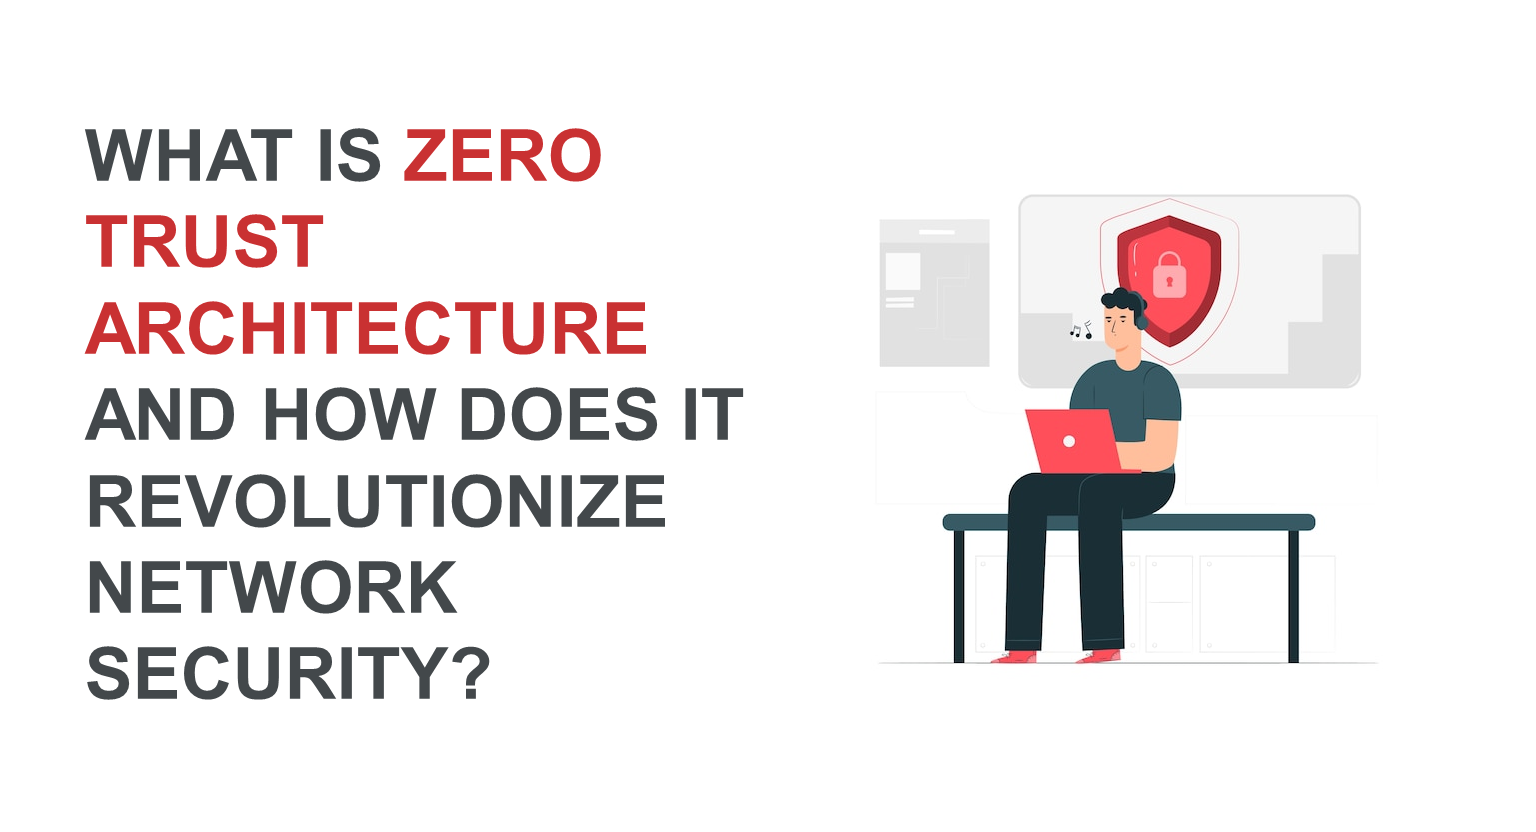 What is Zero Trust Architecture and How Does It Revolutionize Network Security?